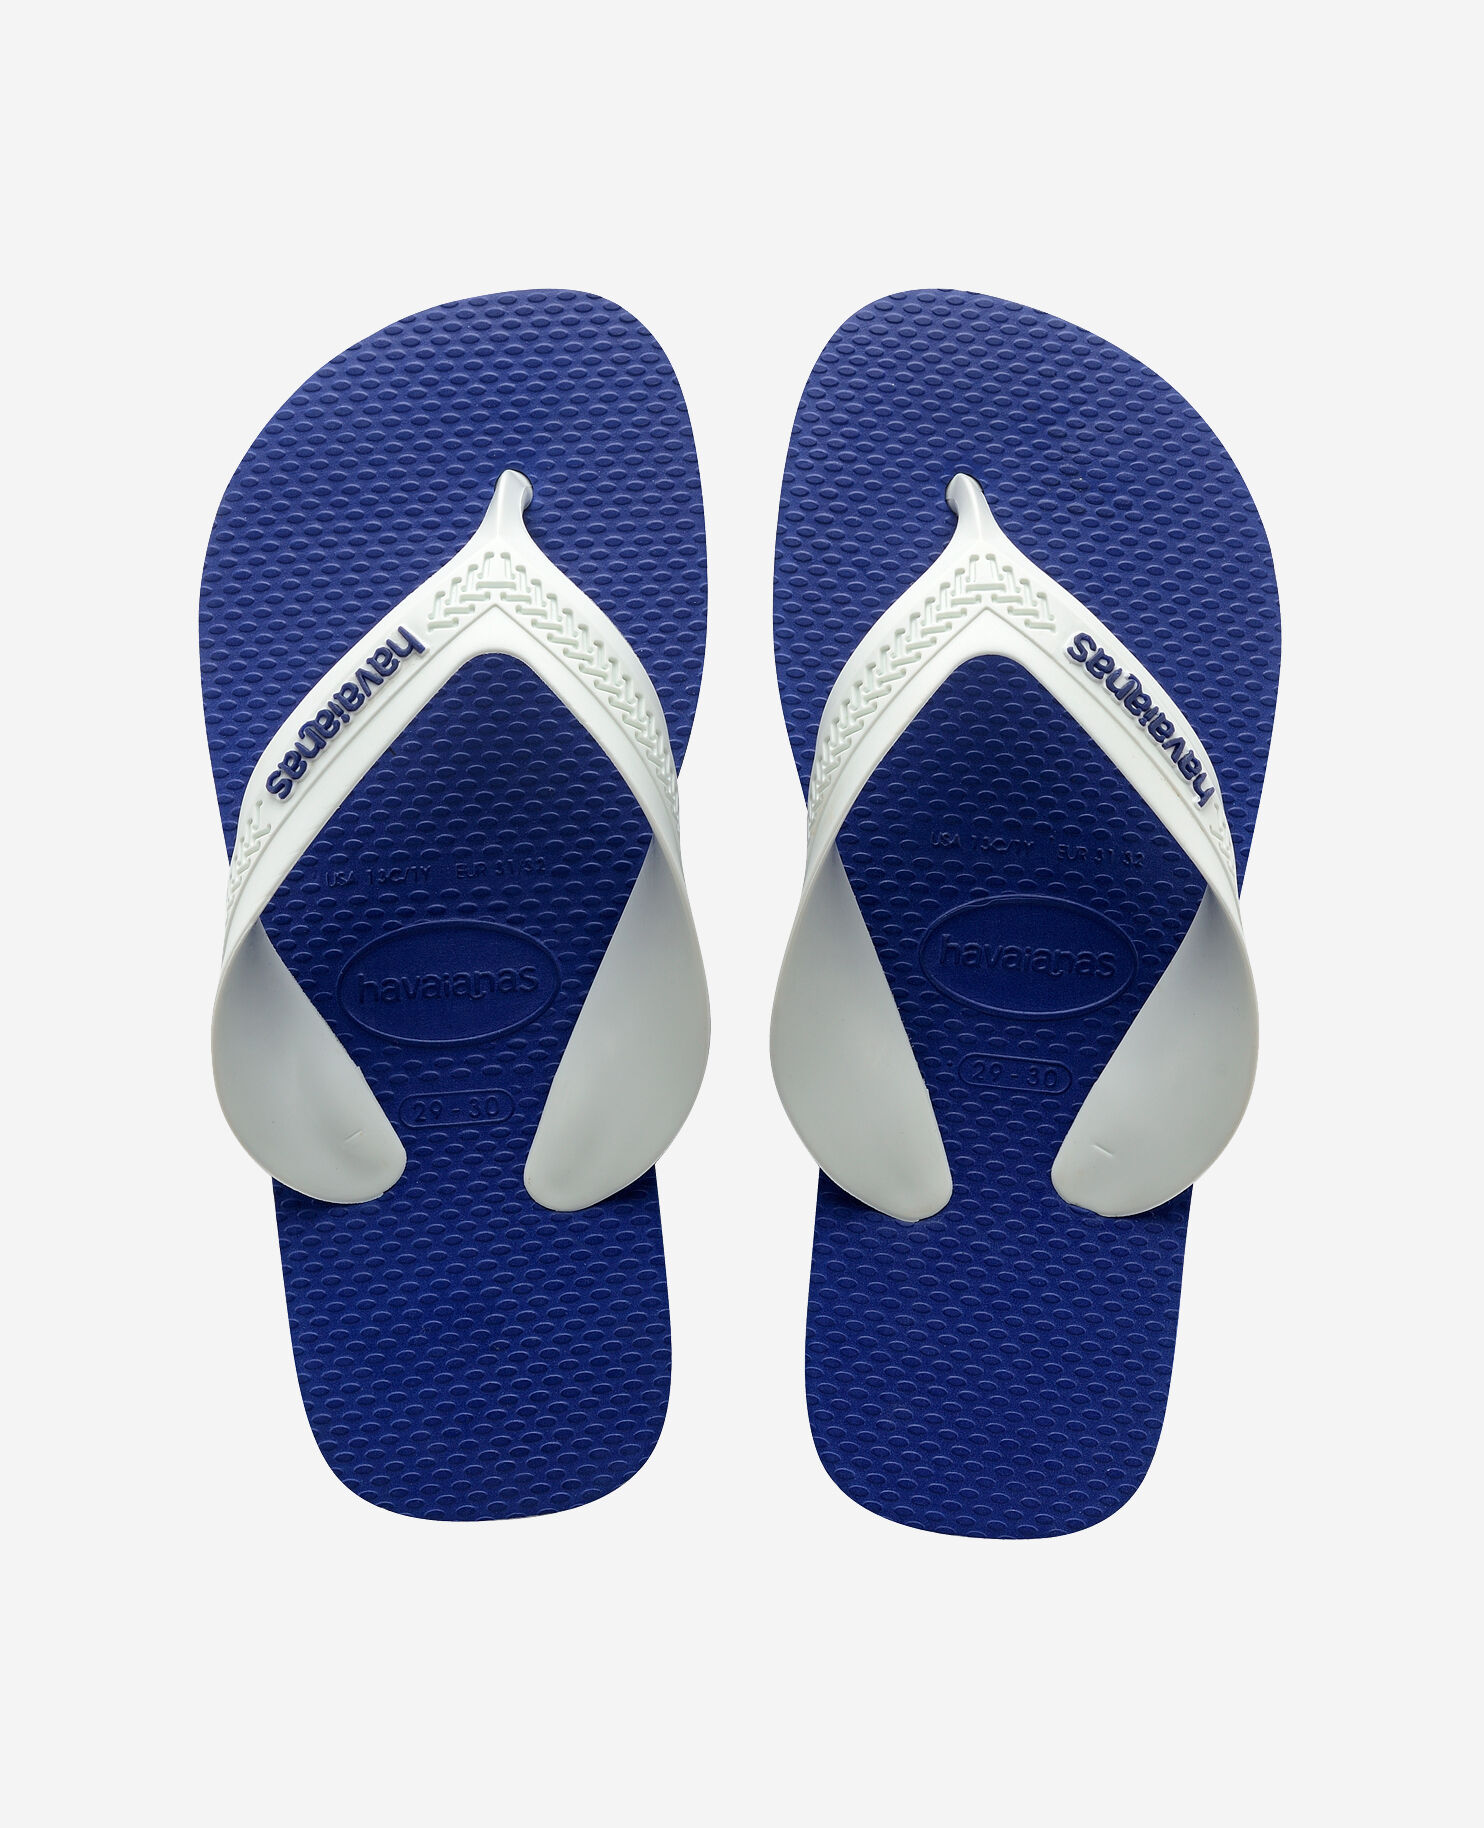 GIRLS  SIZE 35-36 BLACK Details about   HAVAIANAS THONGS BOYS BLUE  BRAND NEW RRP $30 